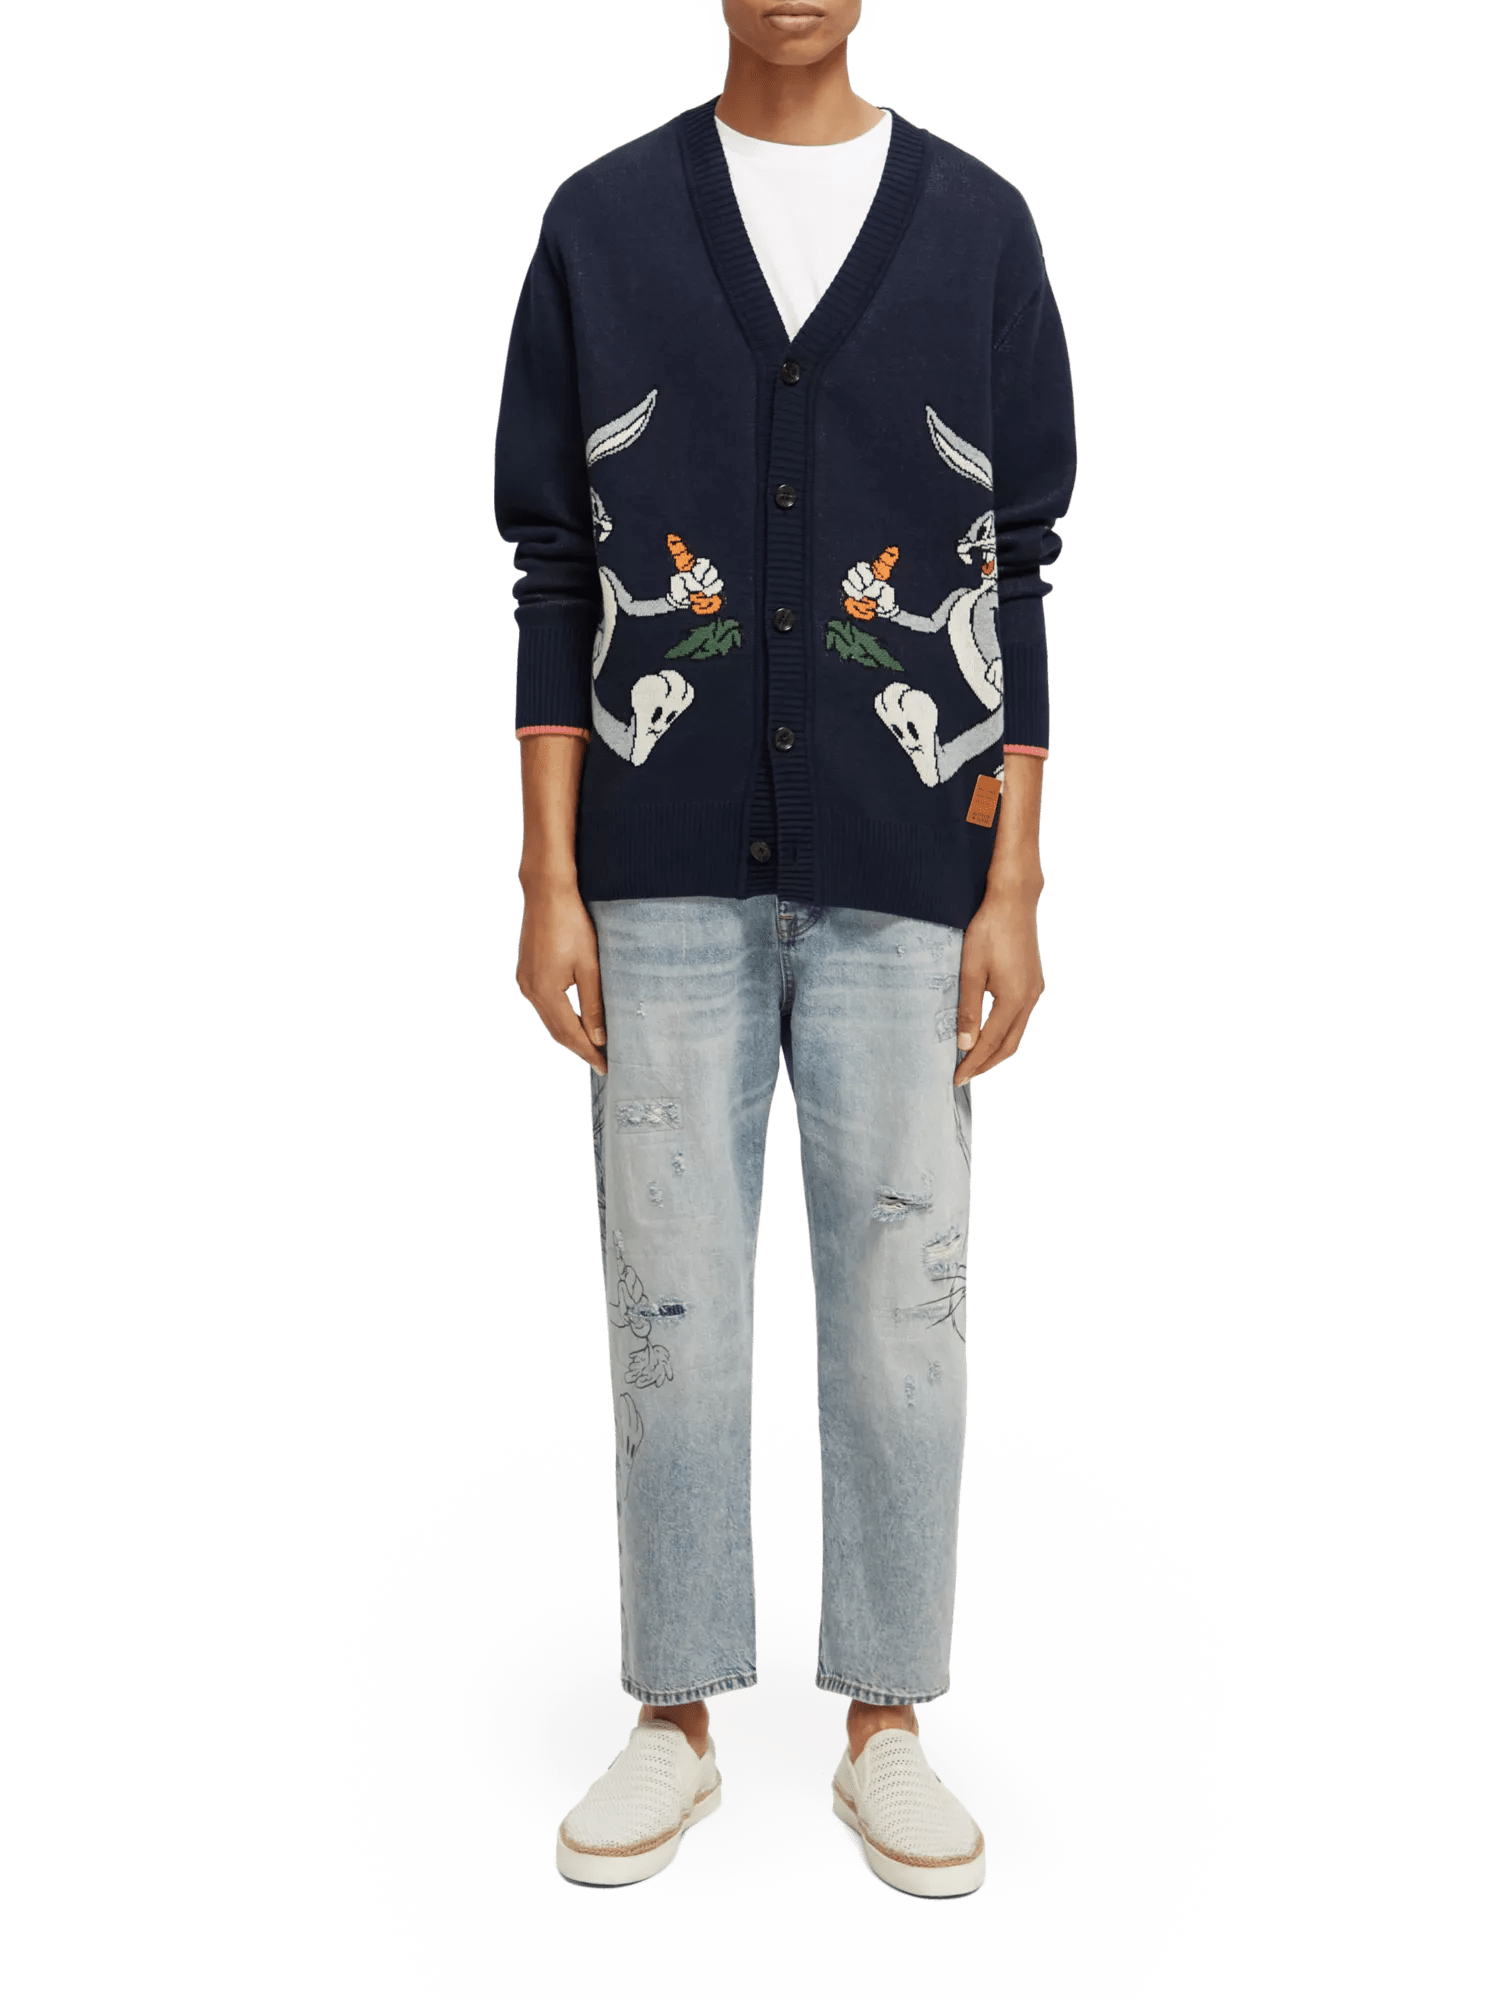 Scotch & Soda Bugs Bunny- The Spirit unisex relaxed jean -That's All Folks NHD-FNT